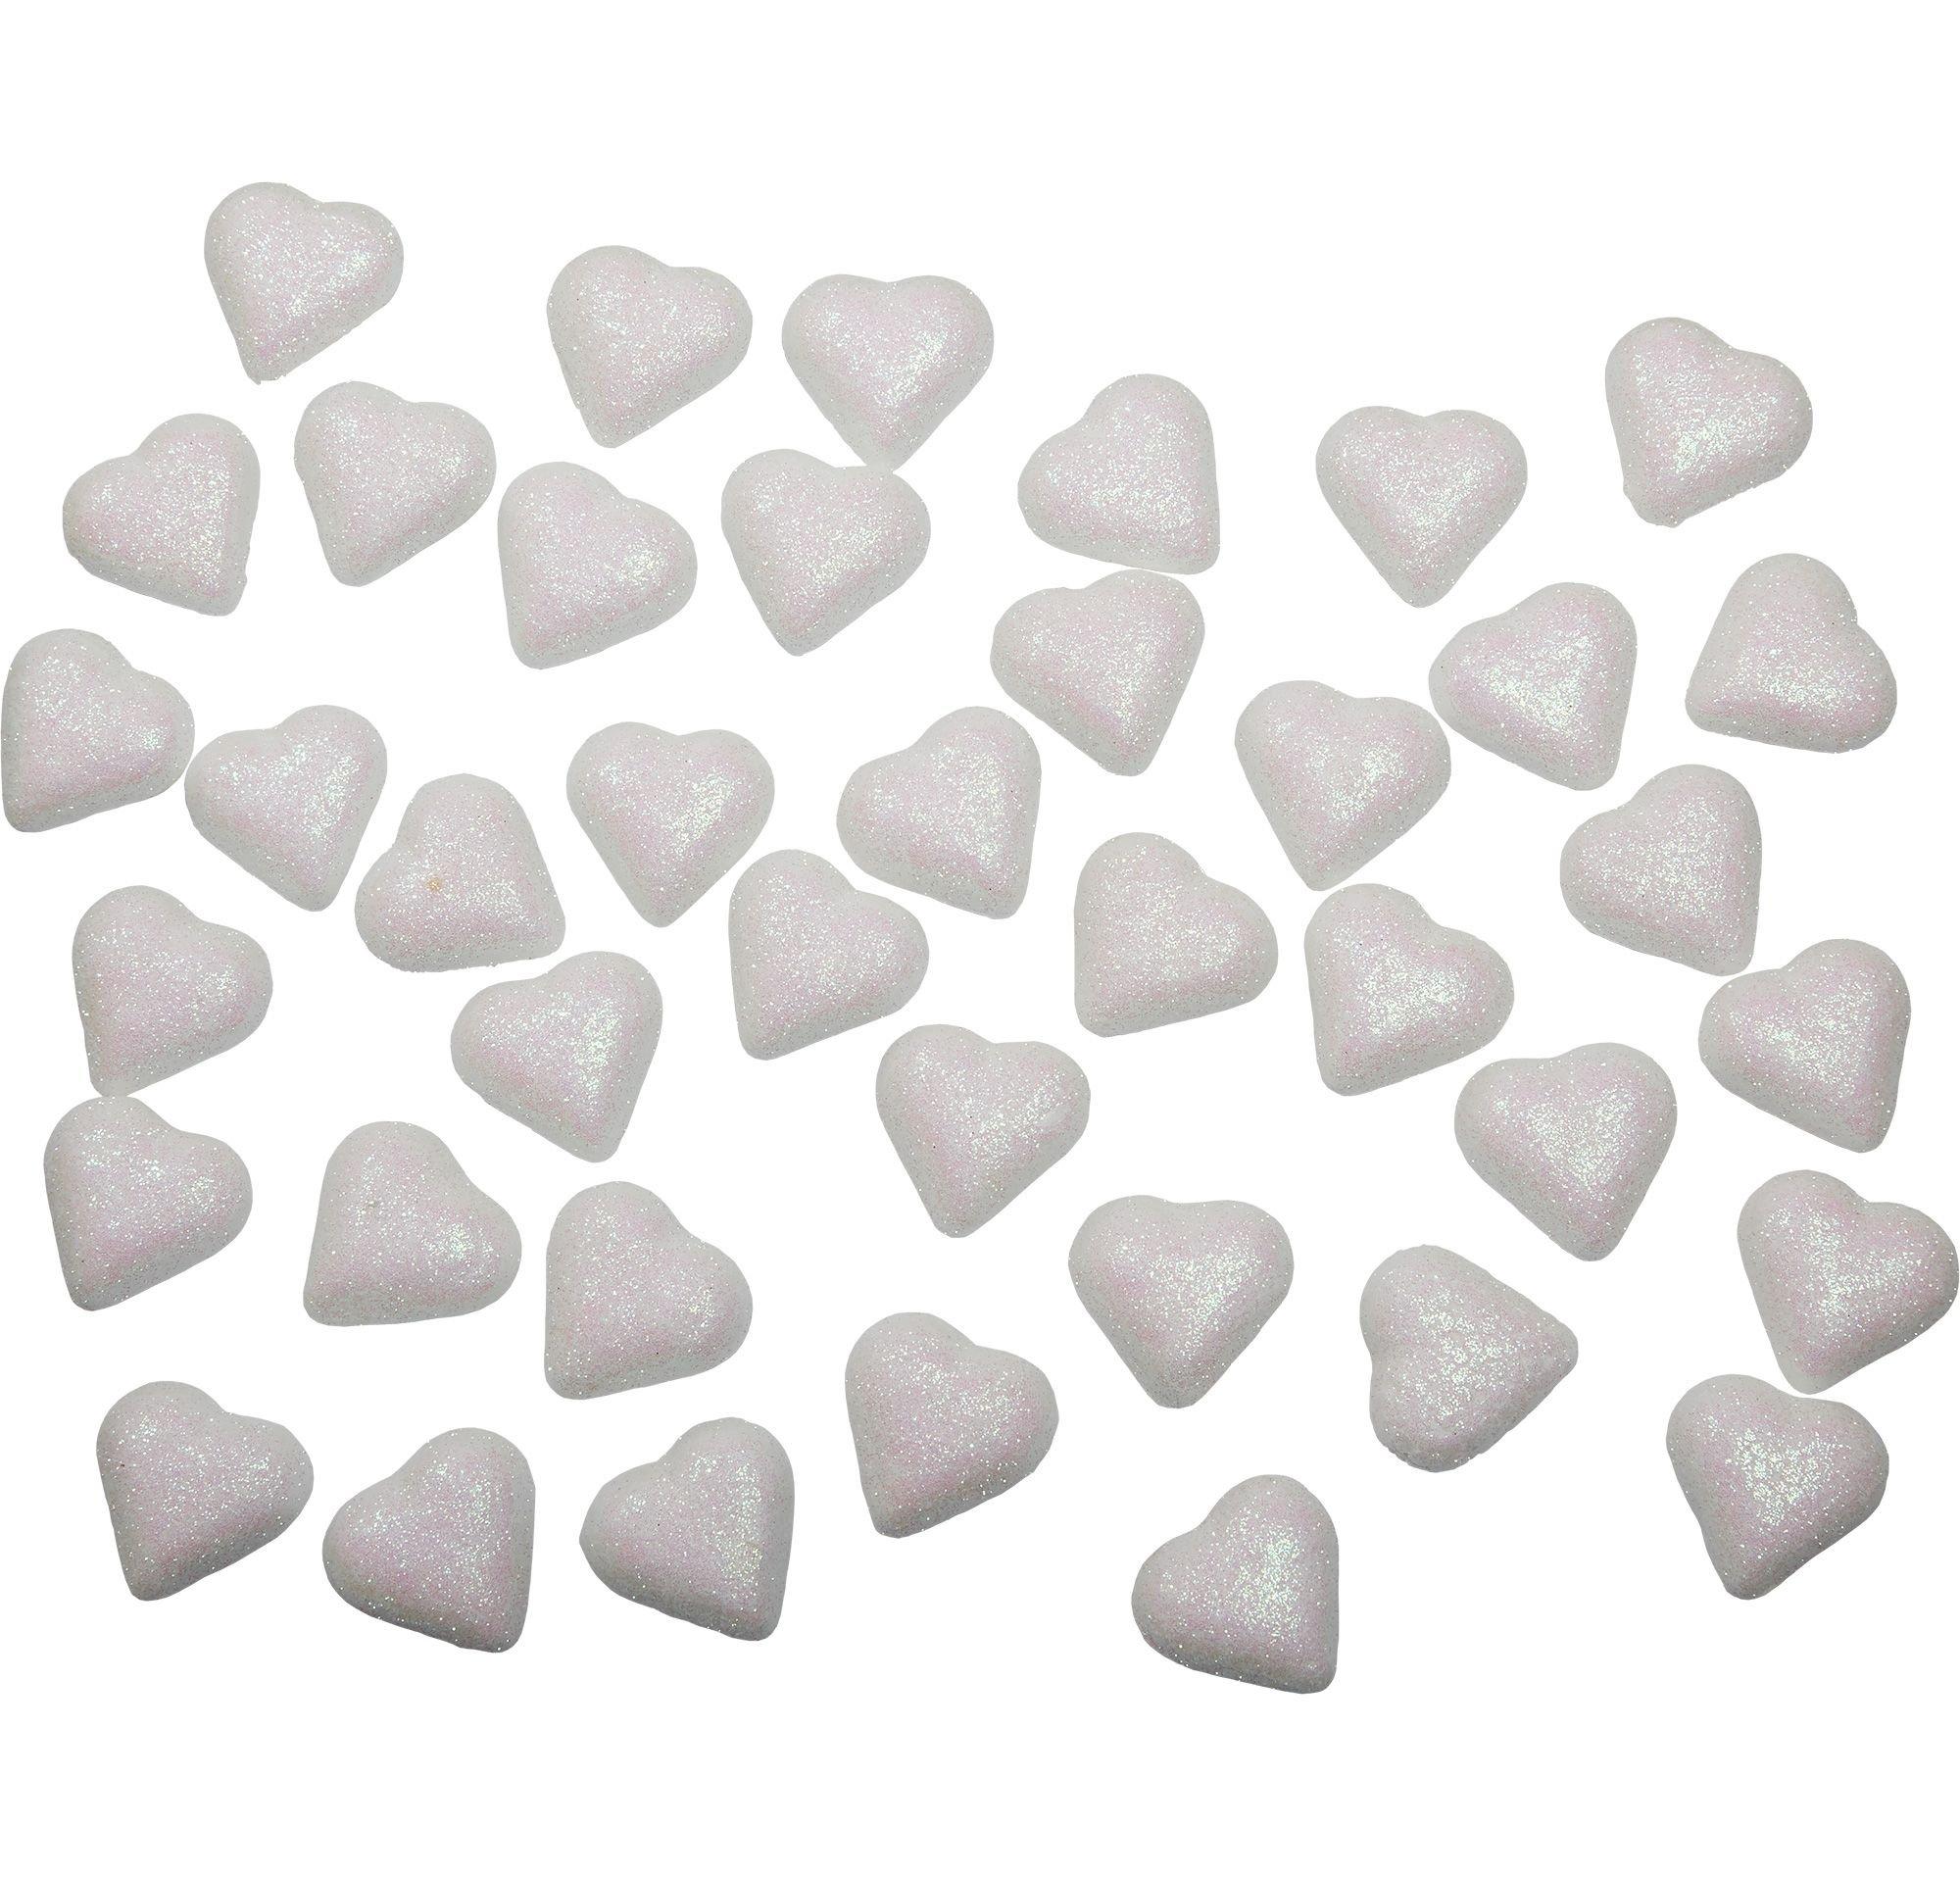 Glitter Hearts Table Scatter 40ct